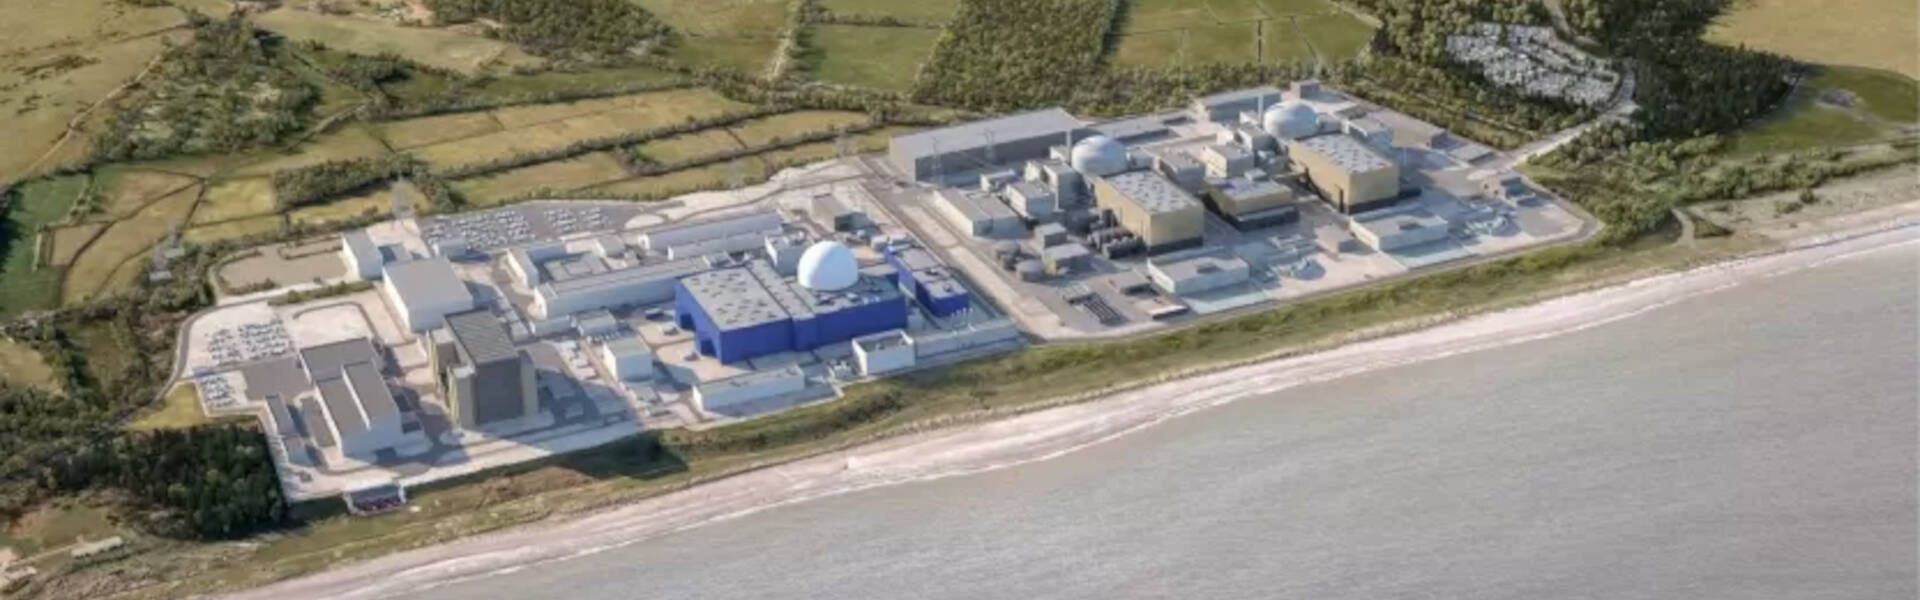 Environment Agency lists concerns for Sizewell consultation